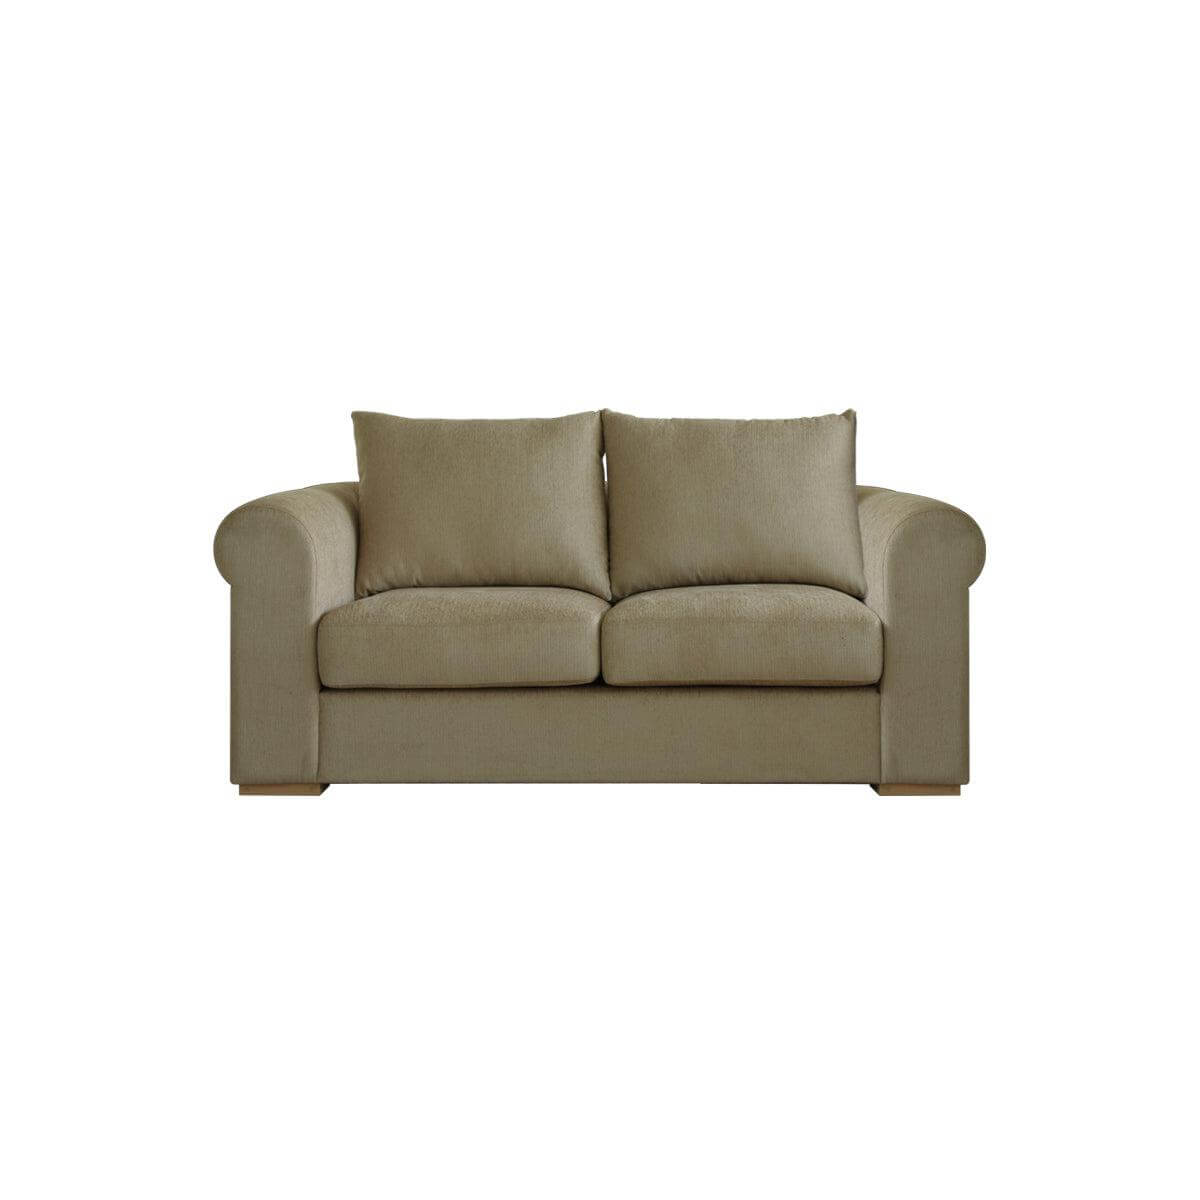 Tuscany 2-Seat Sofa - classic look paired with modern